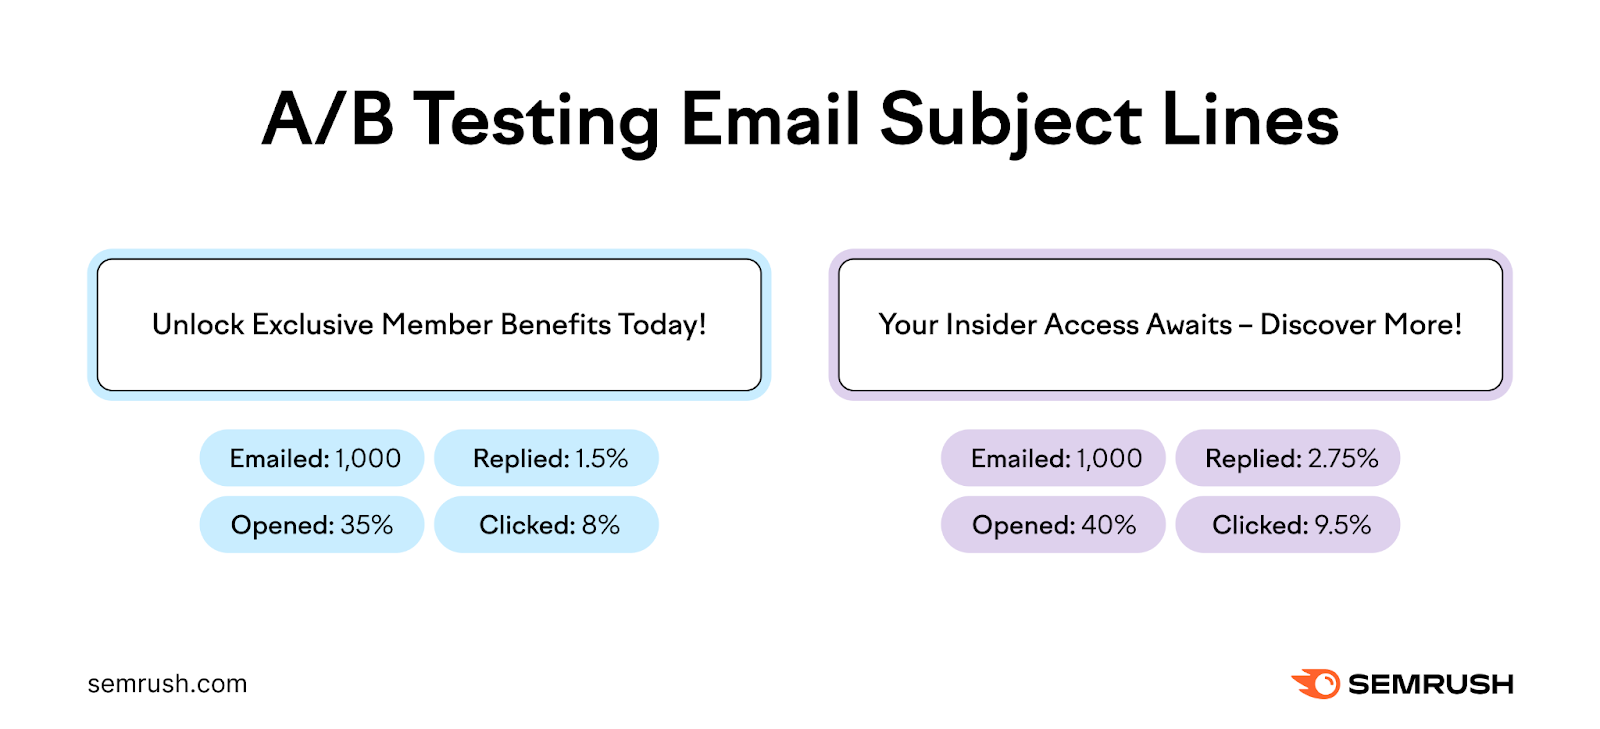 ab testing email subject lines